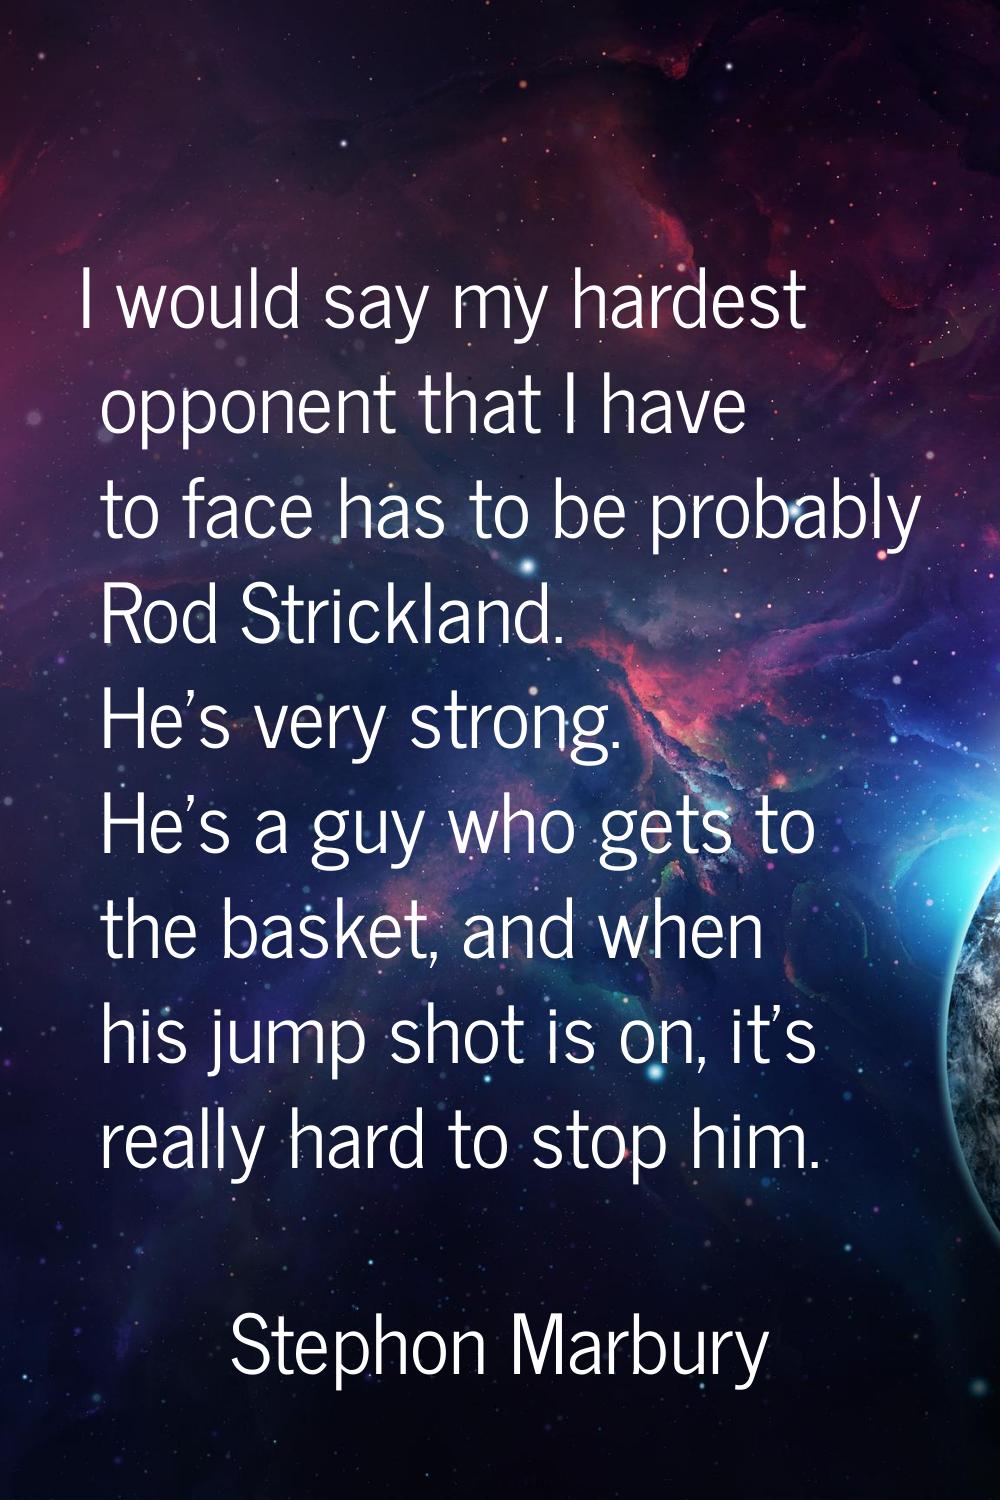 I would say my hardest opponent that I have to face has to be probably Rod Strickland. He's very st